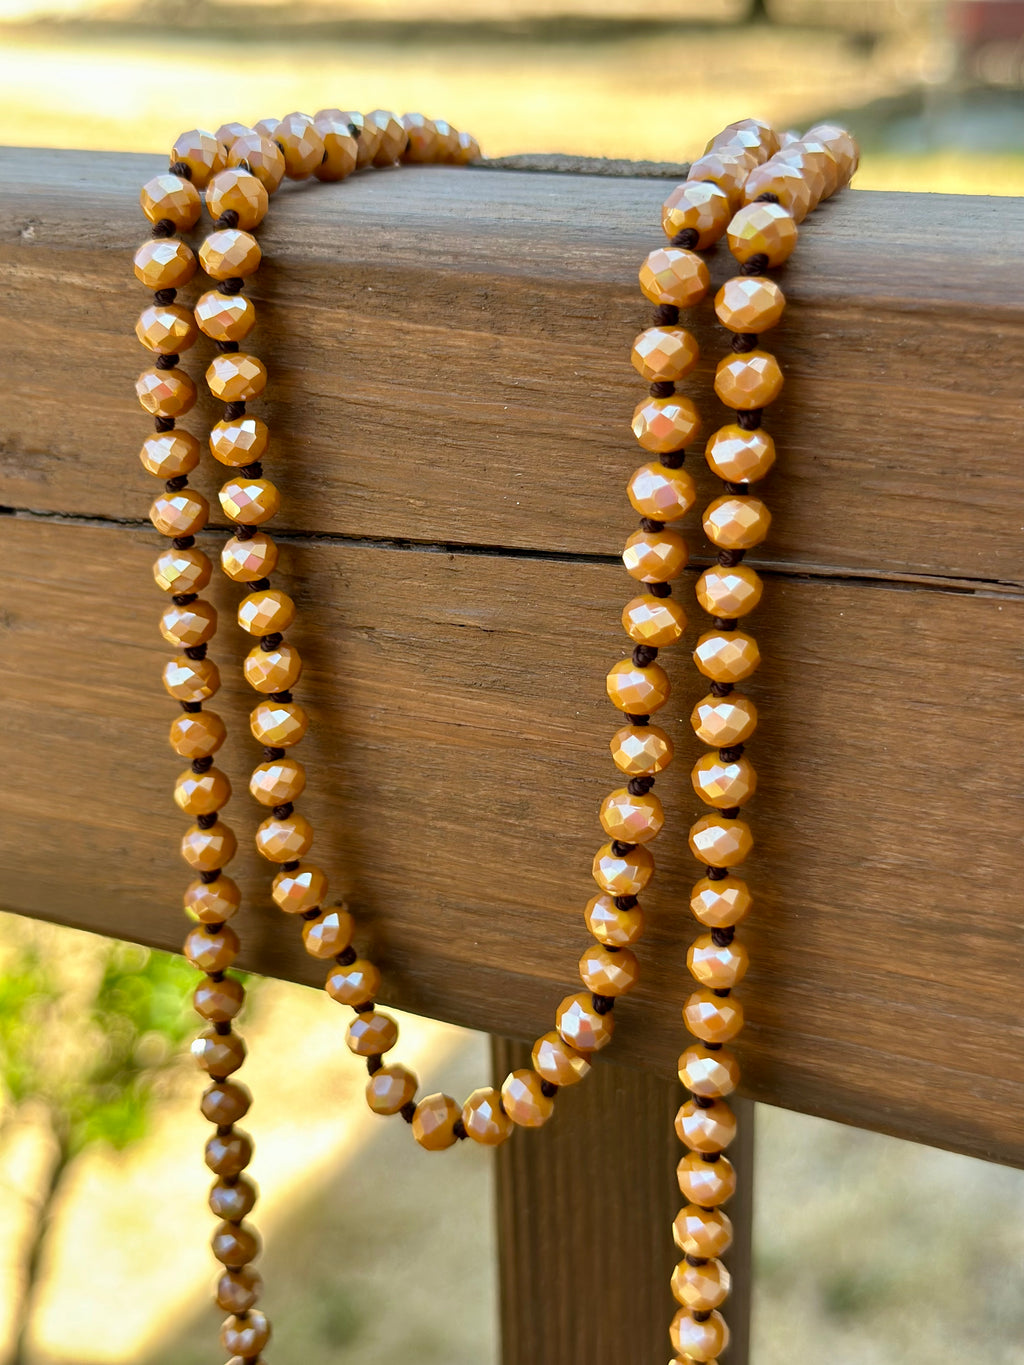 The Harvest Beaded Necklace Strand